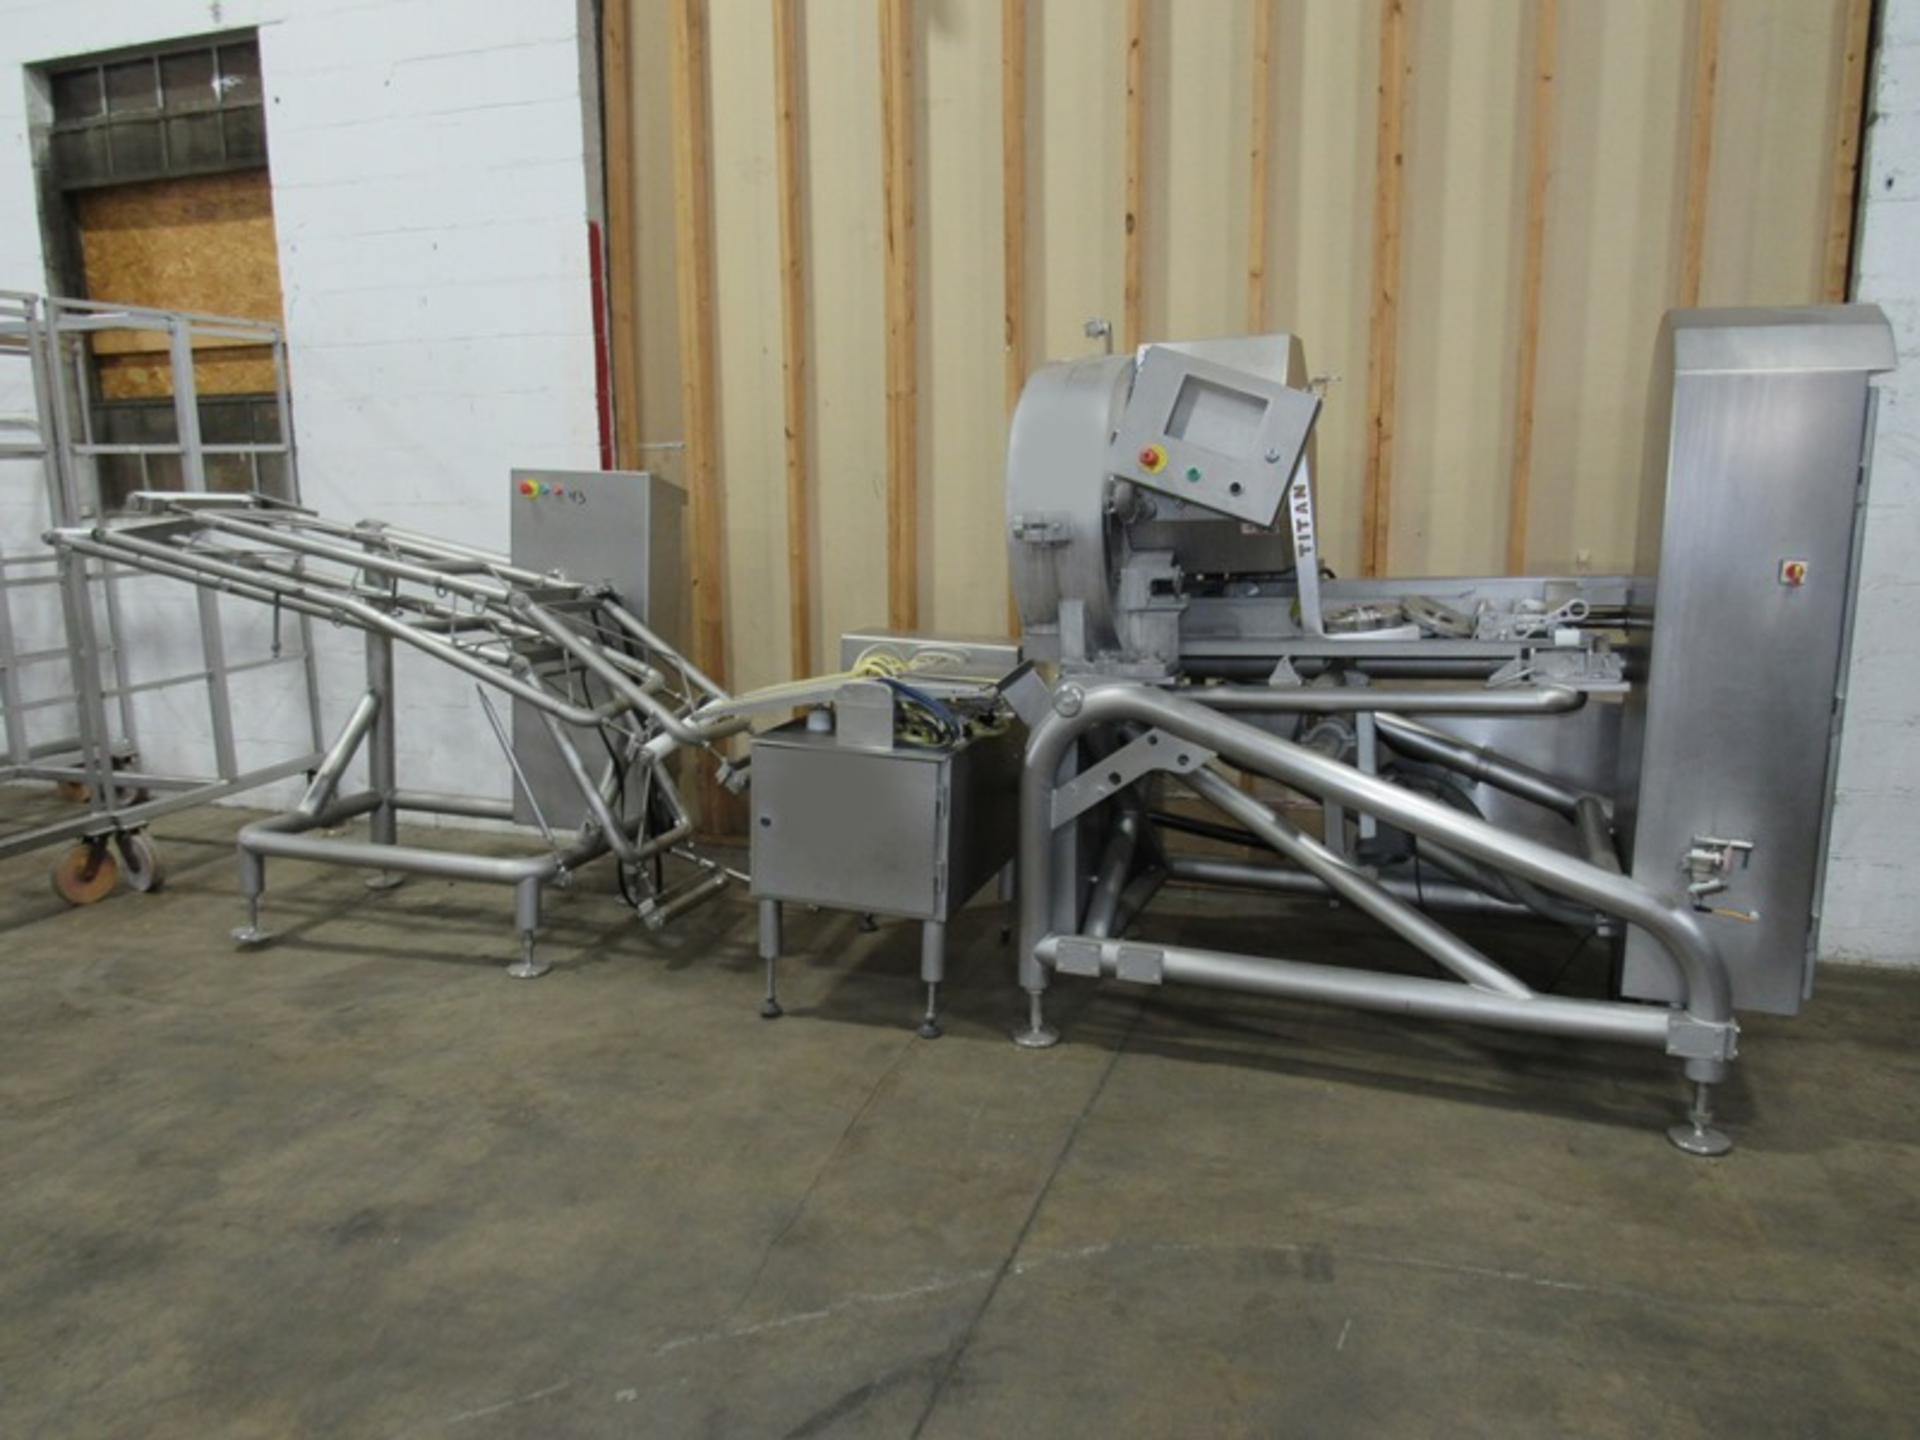 Hermes Mdl. Titan Ram Feed Slicer, checkweigher, exit conveyor, (machine incomplete) (Located in